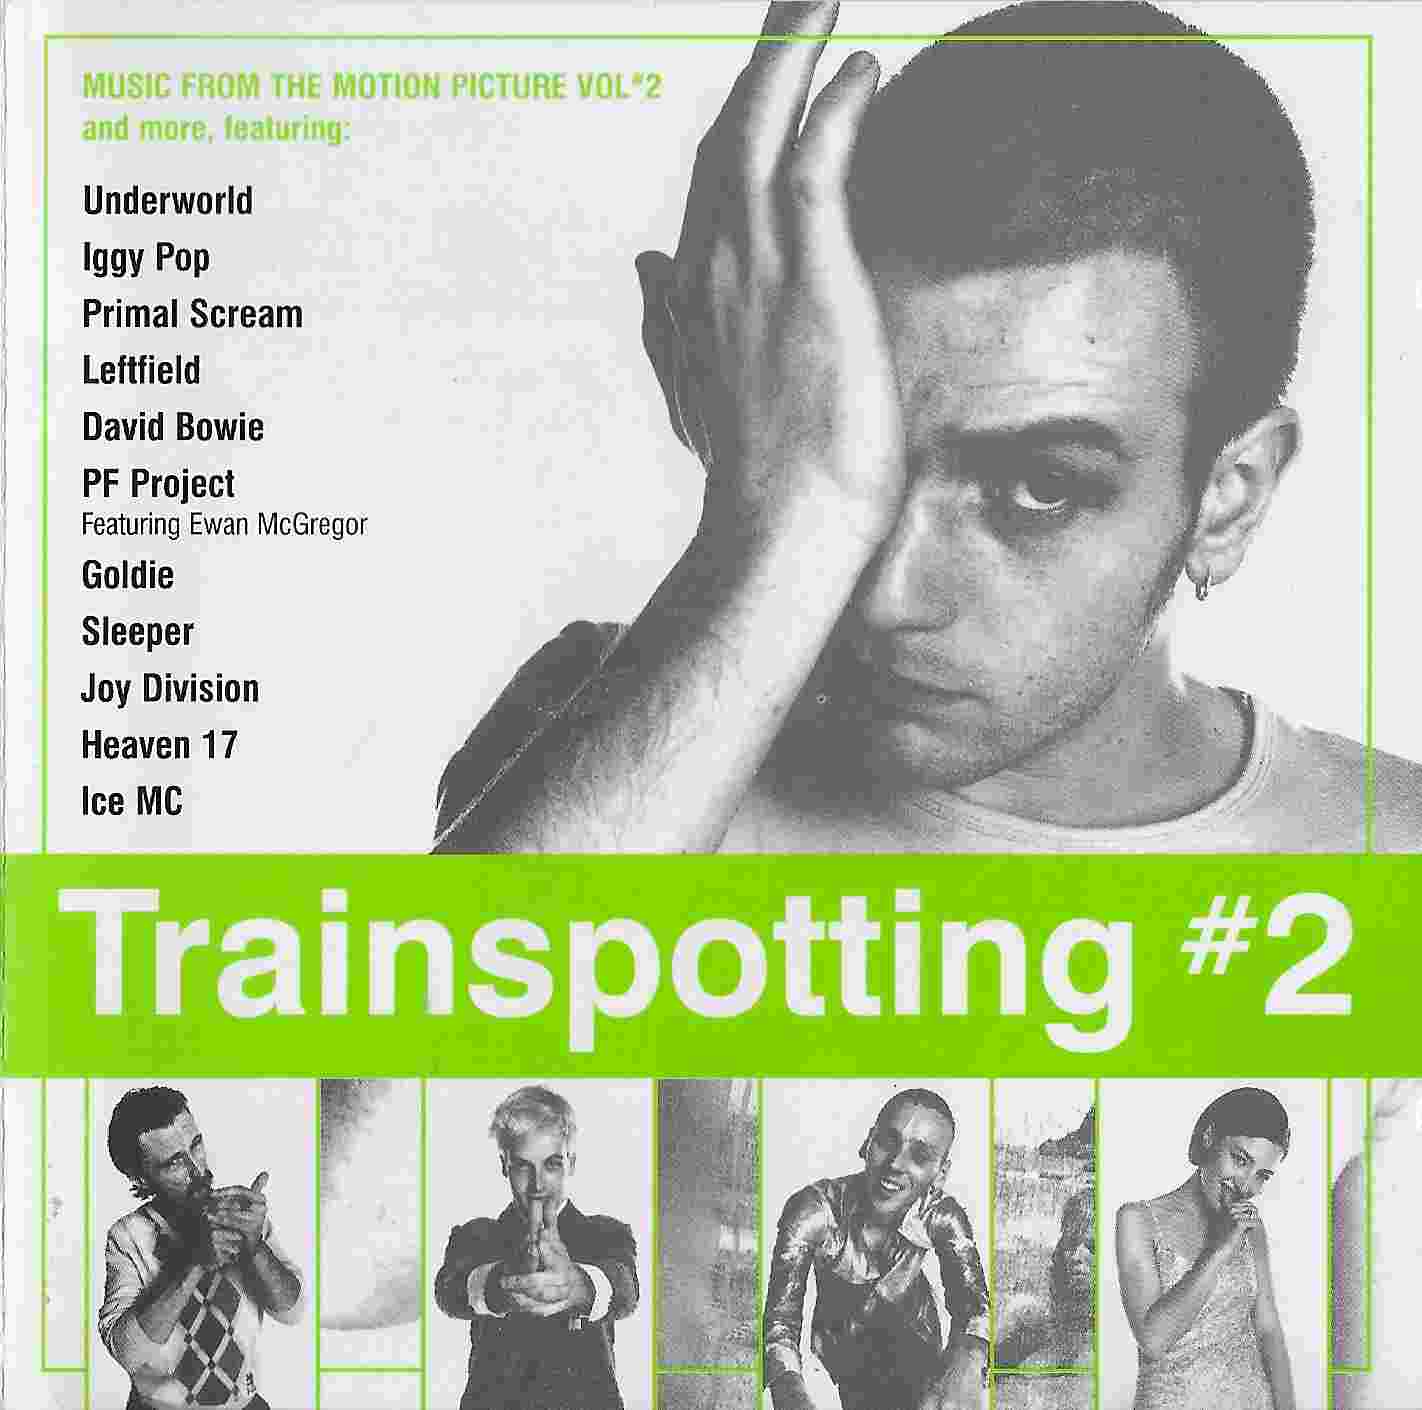 Picture of PRMDCD 36 Trainspotting #2 by artist Various from ITV, Channel 4 and Channel 5 library